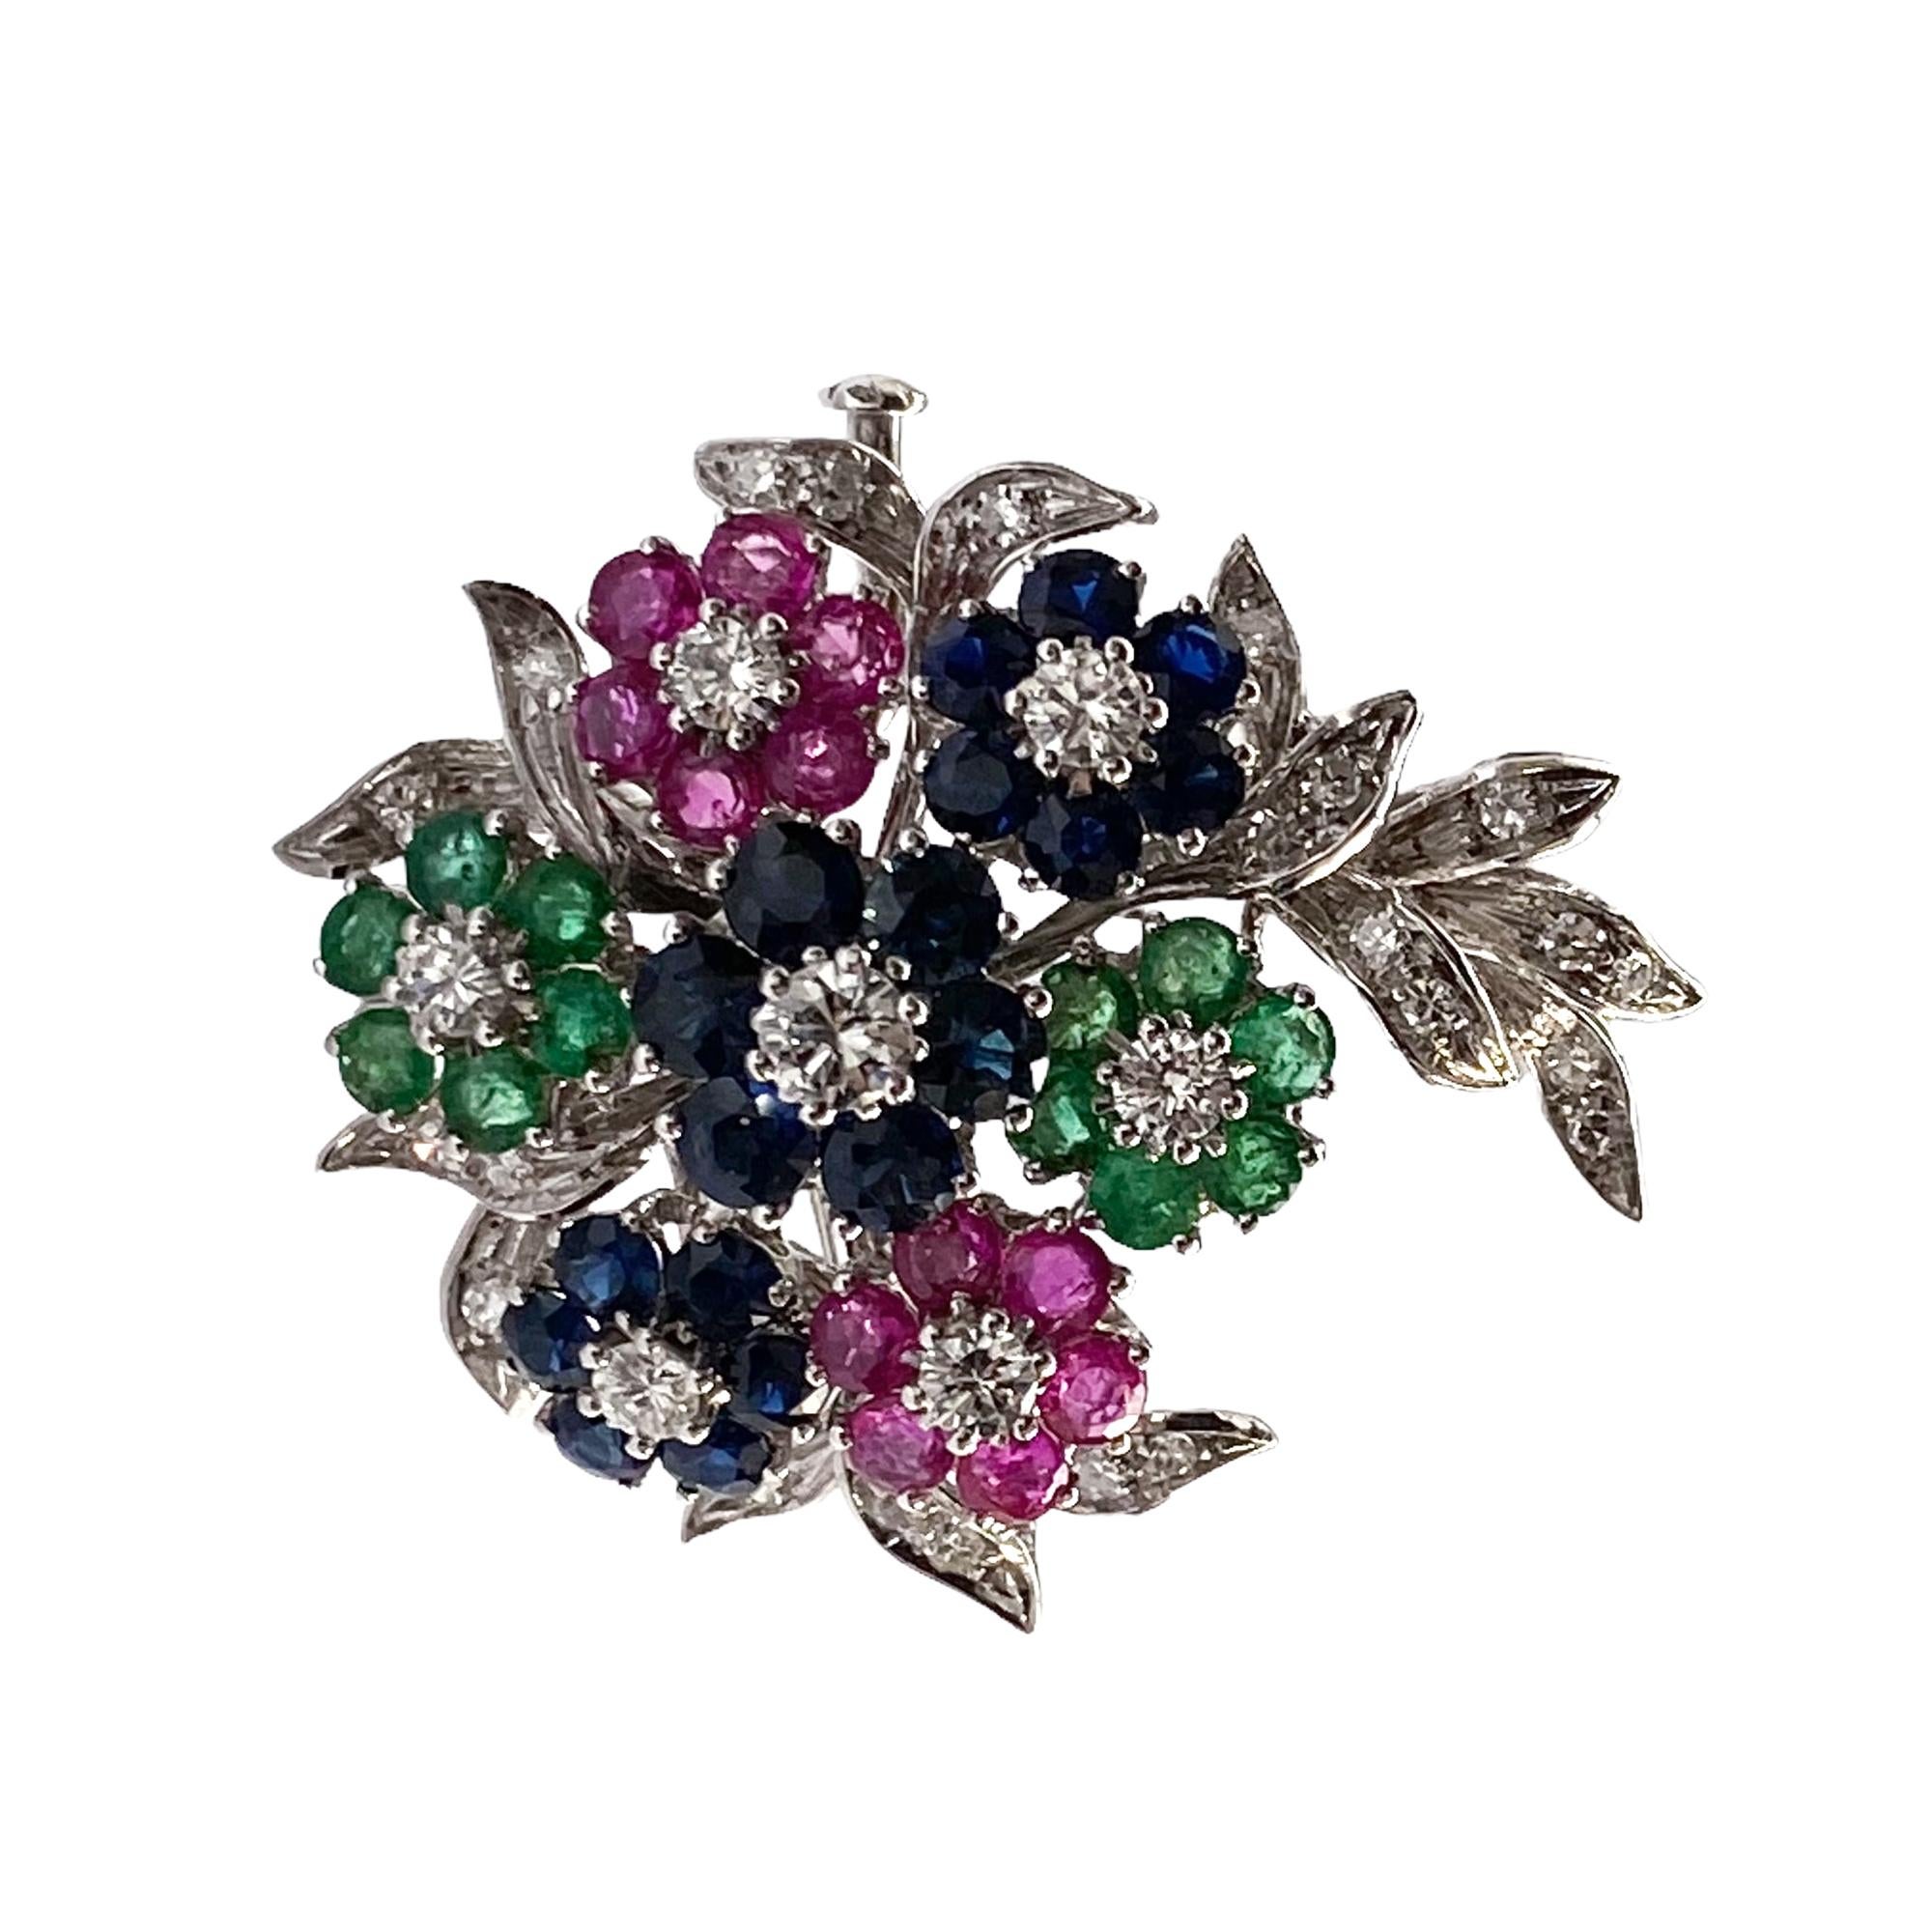 Retro Floral Style Brooch with Diamonds, Rubys, Sapphires, Emeralds, 18kt White Gold For Sale